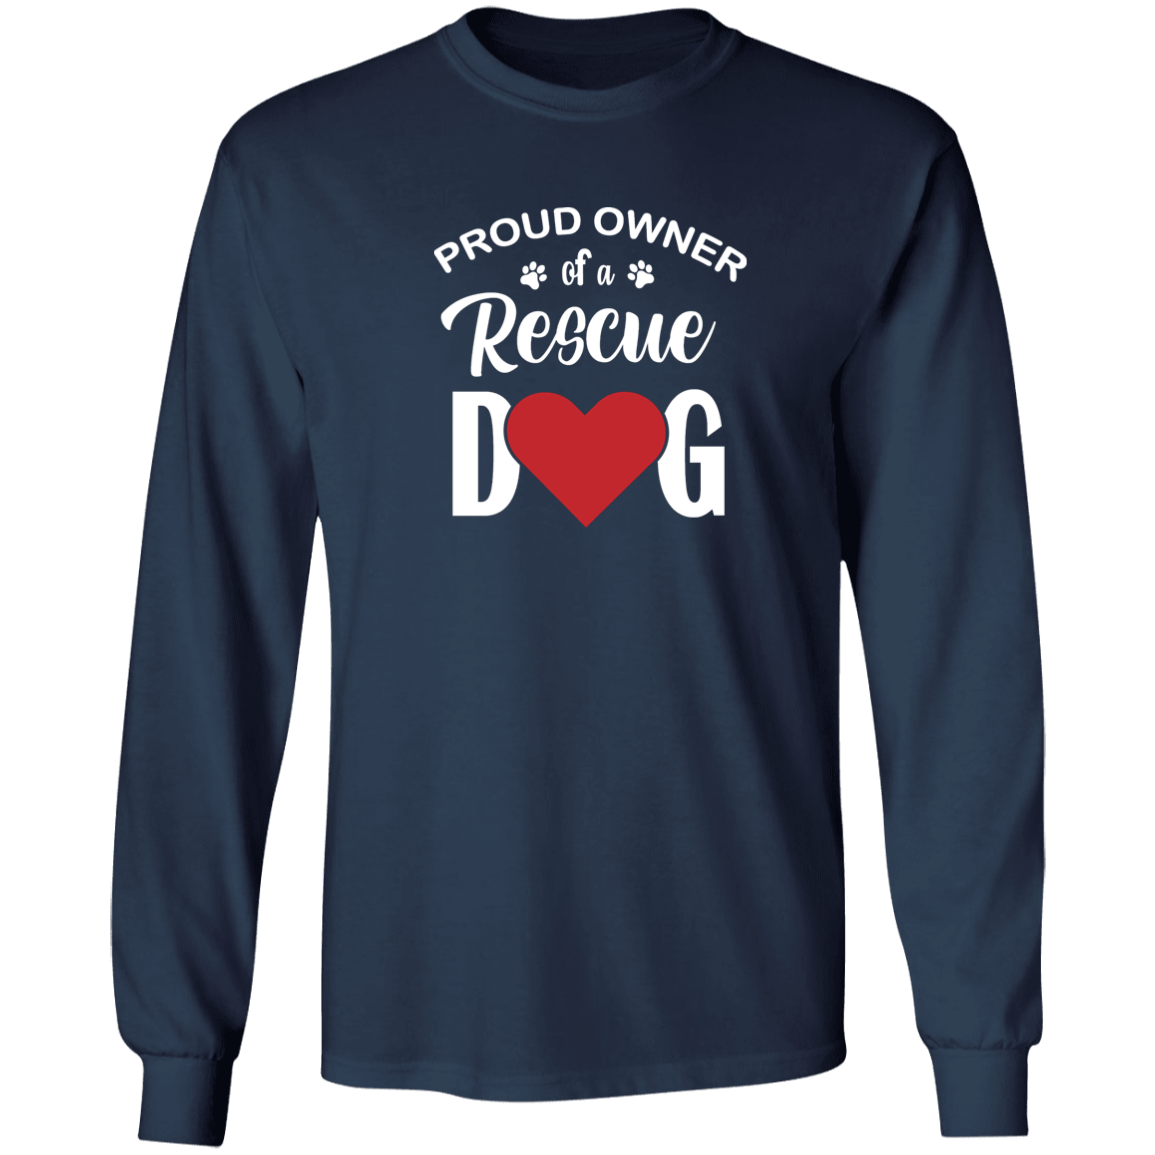 Proud Owner Of A Rescue Dog - Long Sleeve T Shirt.